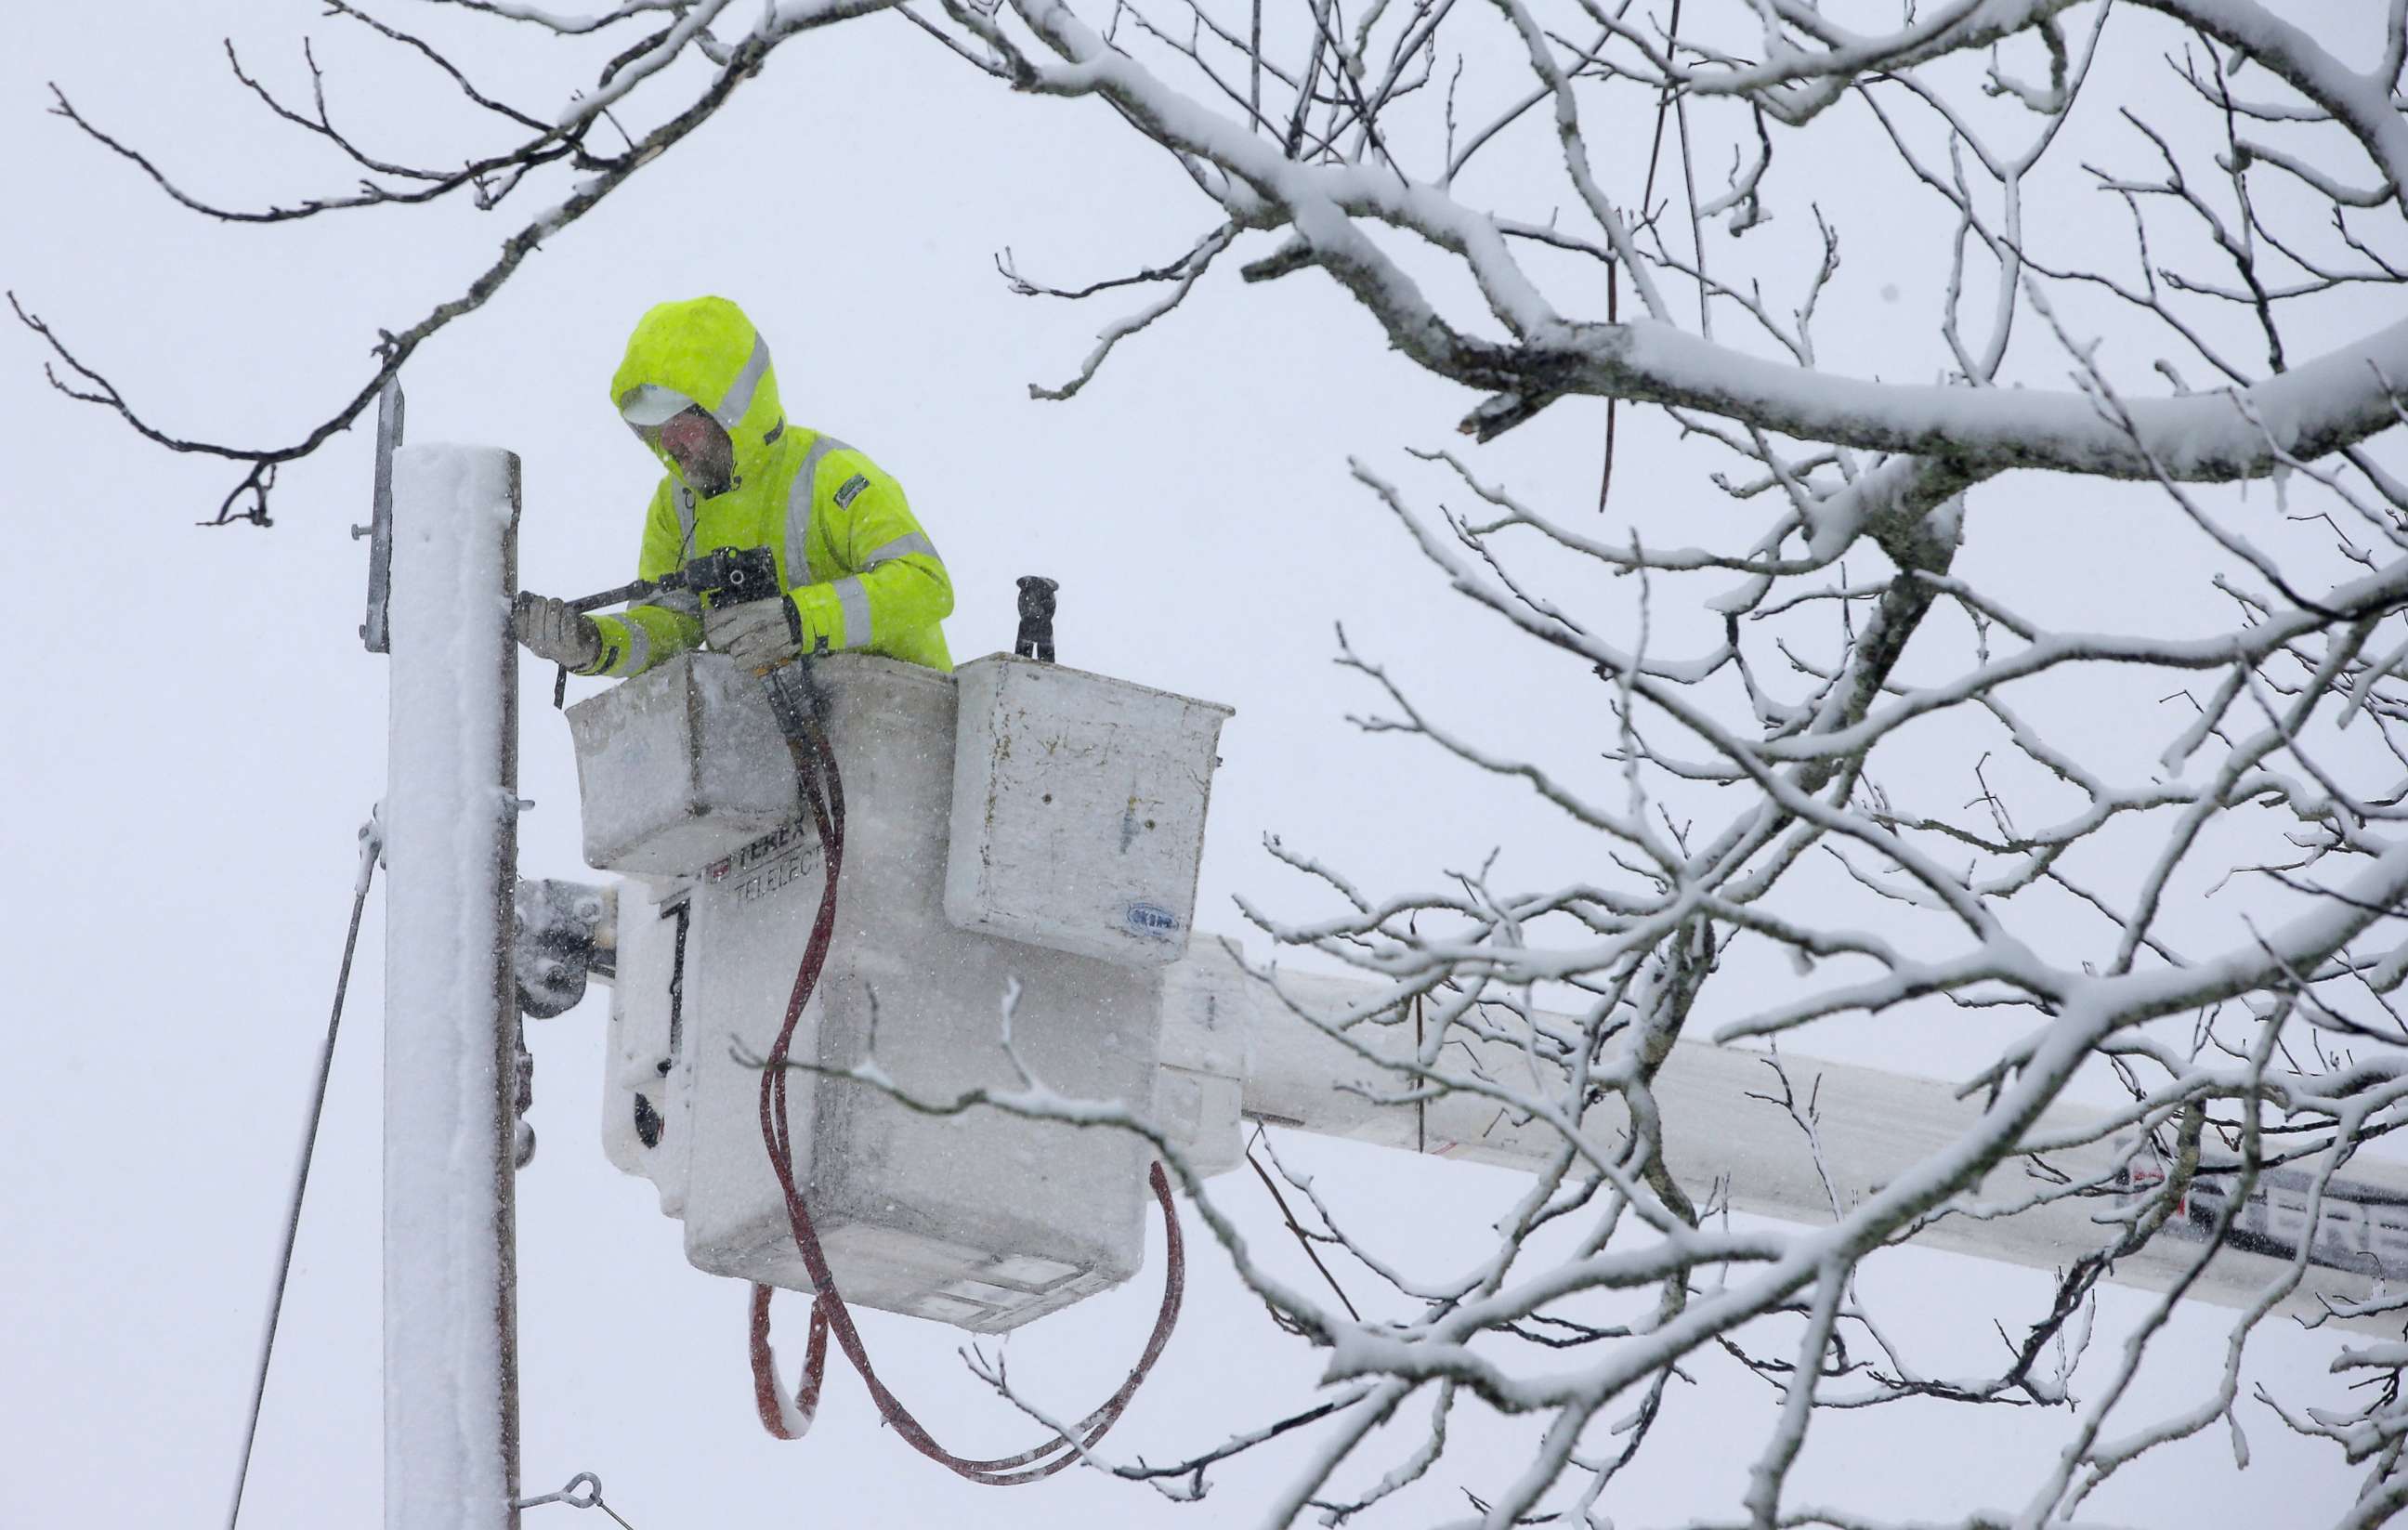 PHOTO: A worker repairs power lines during a winter storm, March 13, 2018, in Norwell, Mass. 